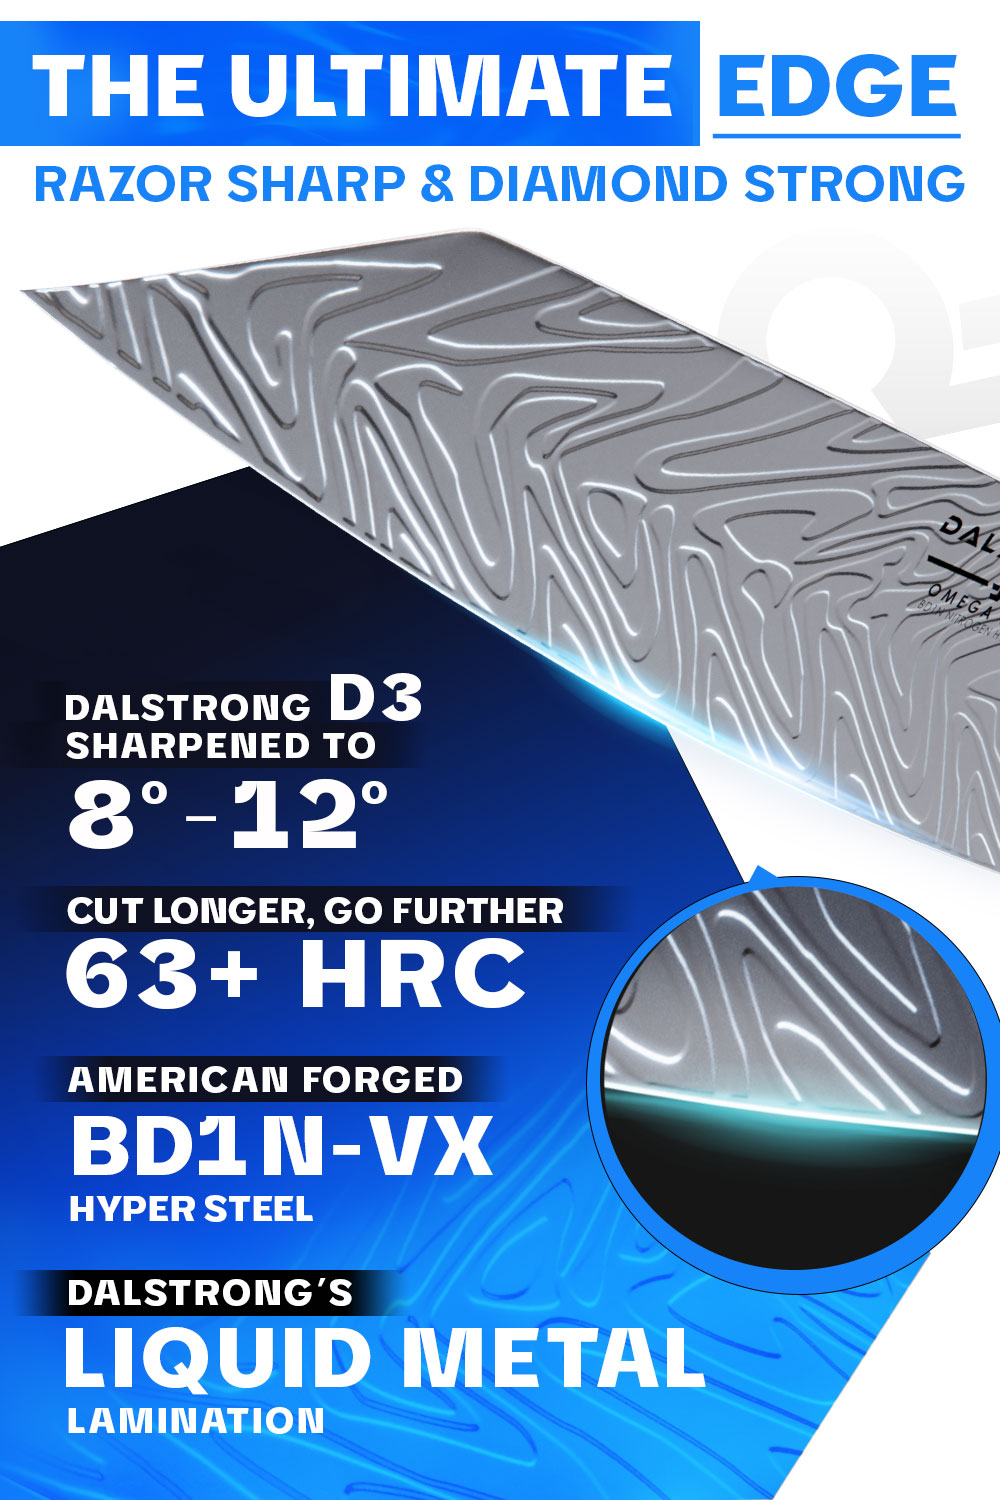 Dalstrong omega series 8.5 inch chef knife collectors set featuring it's razor sharp american forged hyper steel.